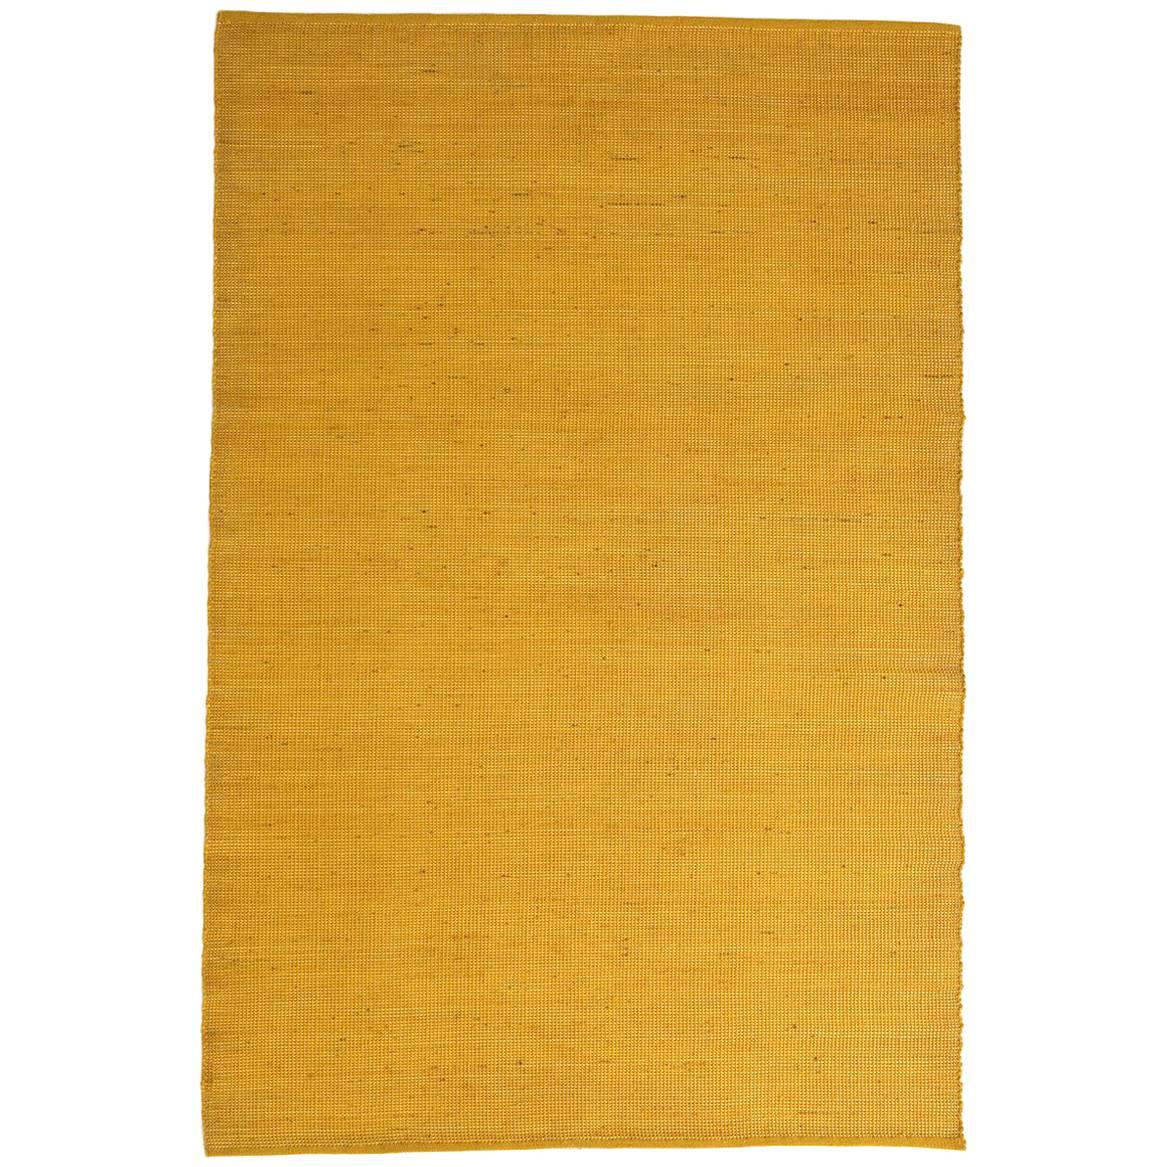 Tatami Yellow Wool and Jute Rug by Nani Marquina & Ariadna Miquel, Small